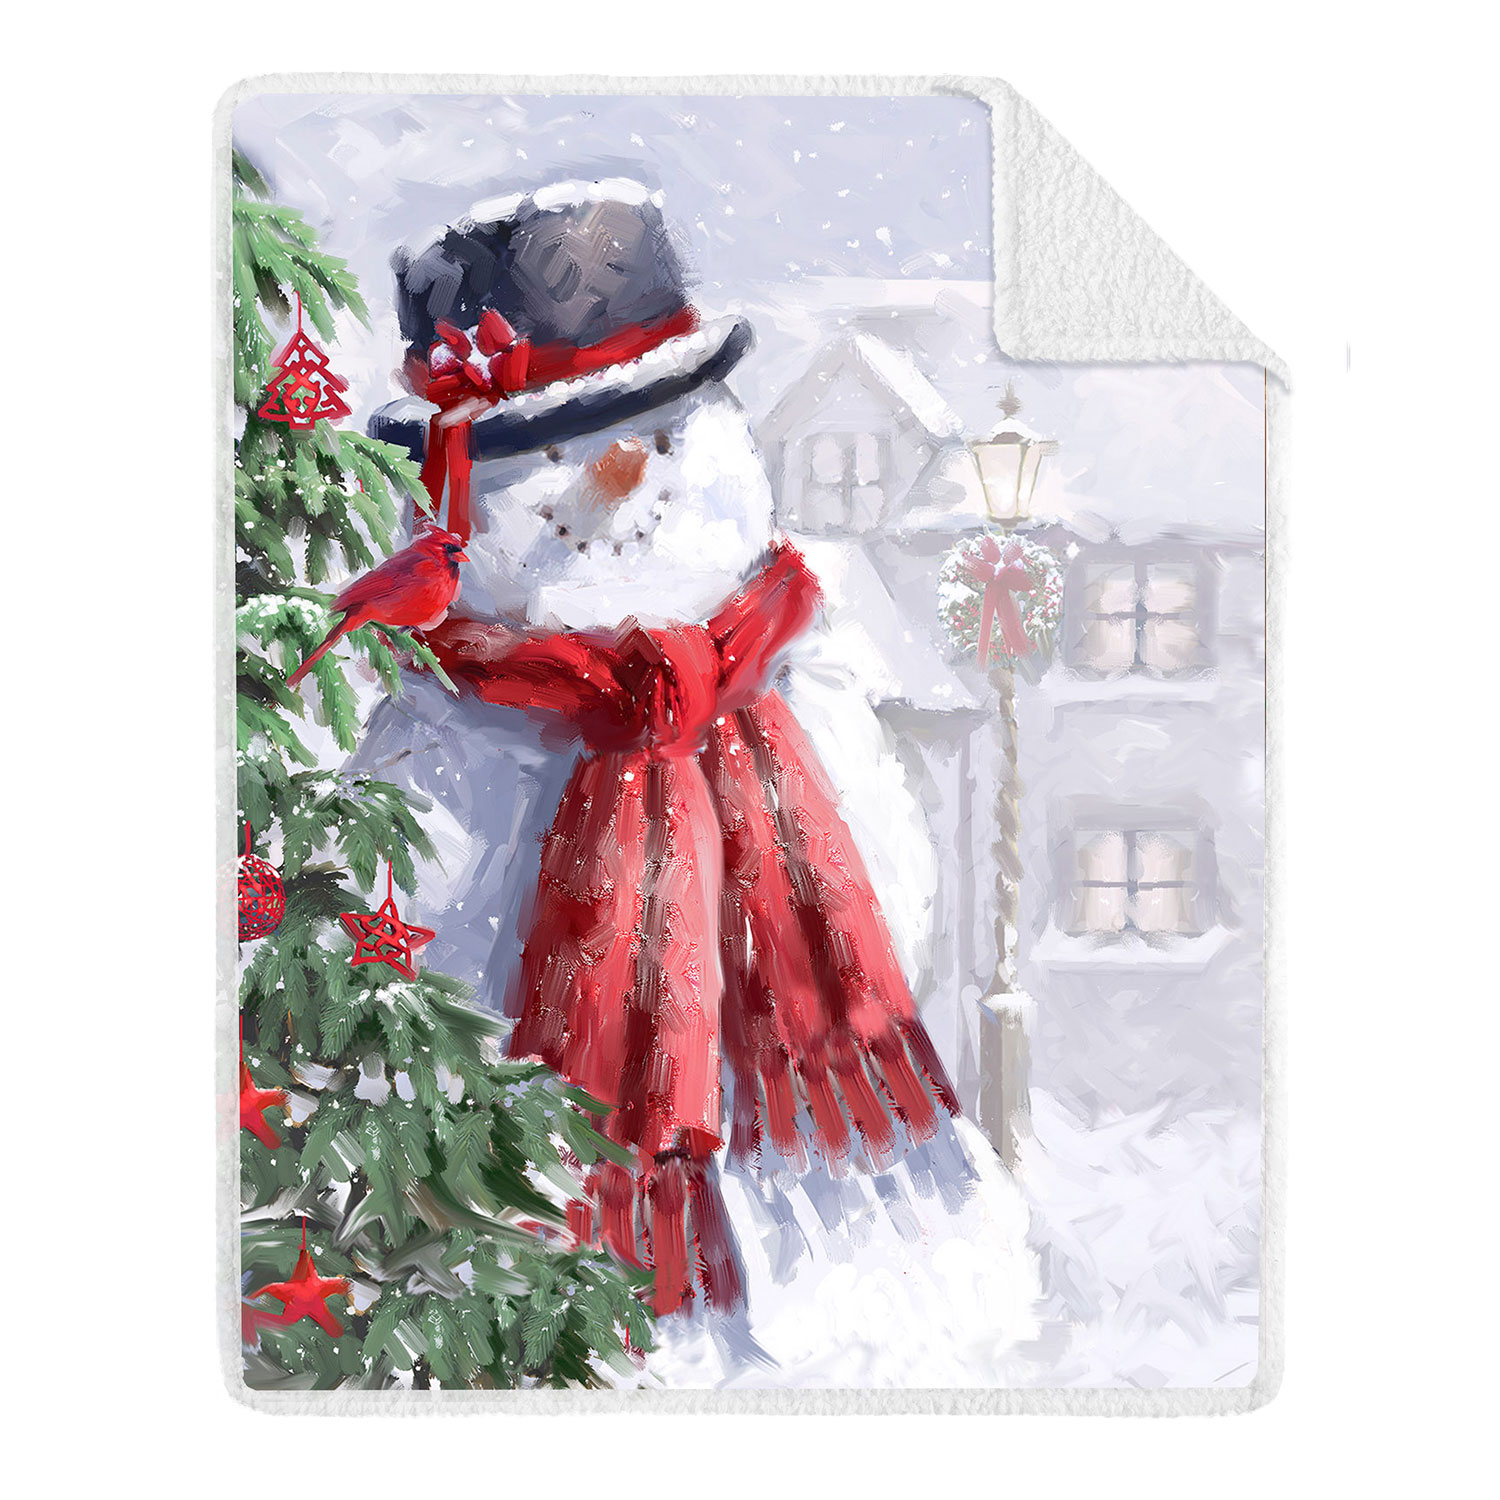 Printed photoreal throw with sherpa backing, 48"x60" - Snowman